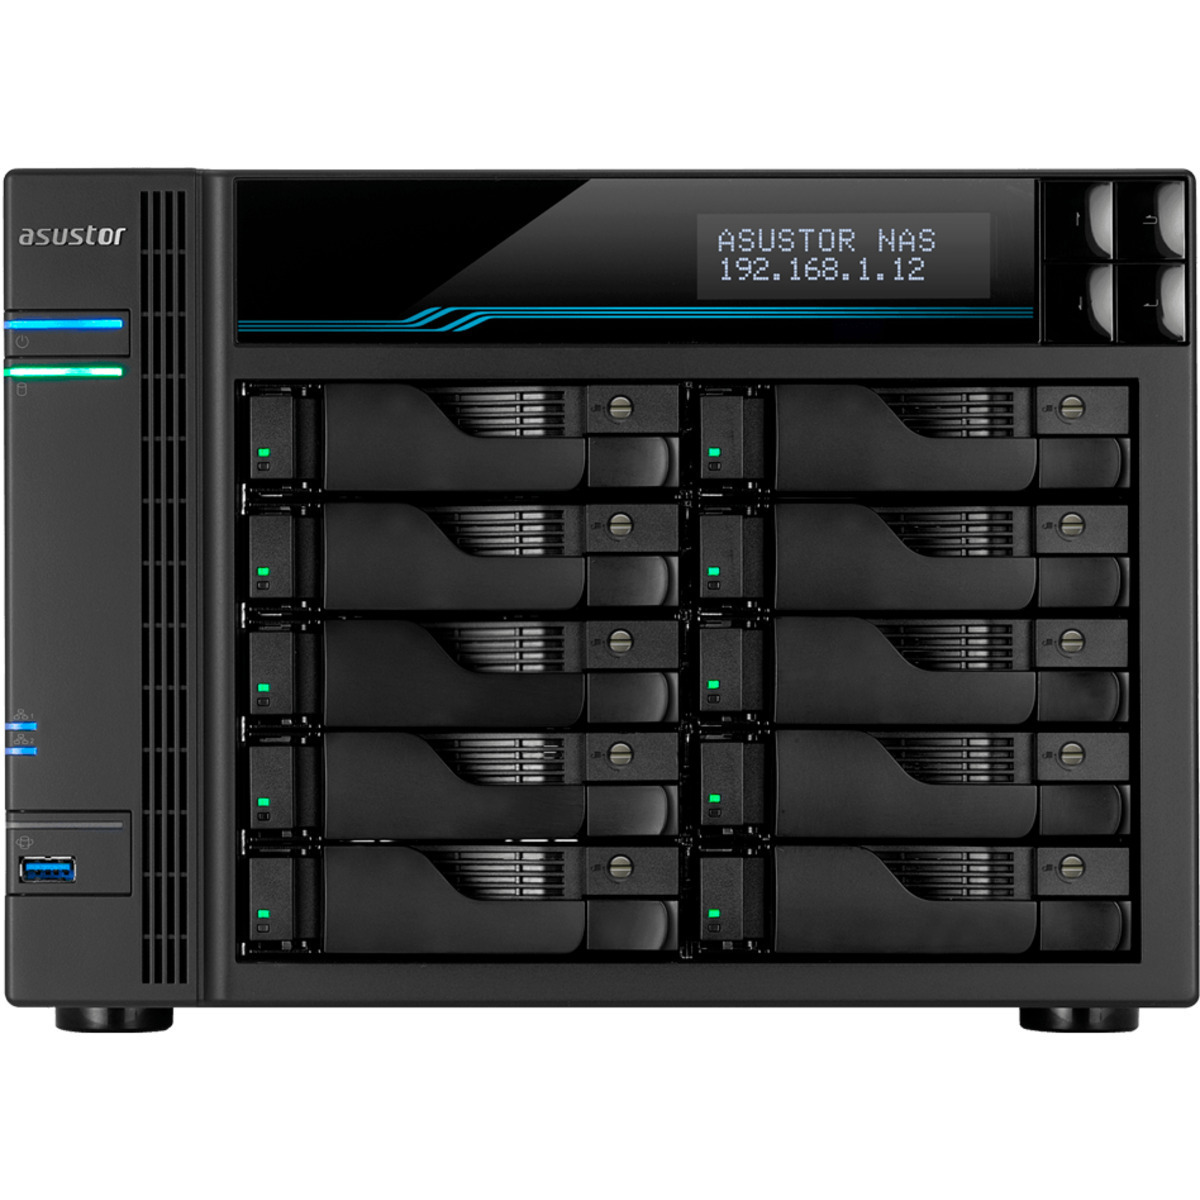 ASUSTOR AS6510T Lockerstor 10 120tb 10-Bay Desktop Multimedia / Power User / Business NAS - Network Attached Storage Device 10x12tb Seagate IronWolf Pro ST12000NT001 3.5 7200rpm SATA 6Gb/s HDD NAS Class Drives Installed - Burn-In Tested - ON SALE - FREE RAM UPGRADE AS6510T Lockerstor 10